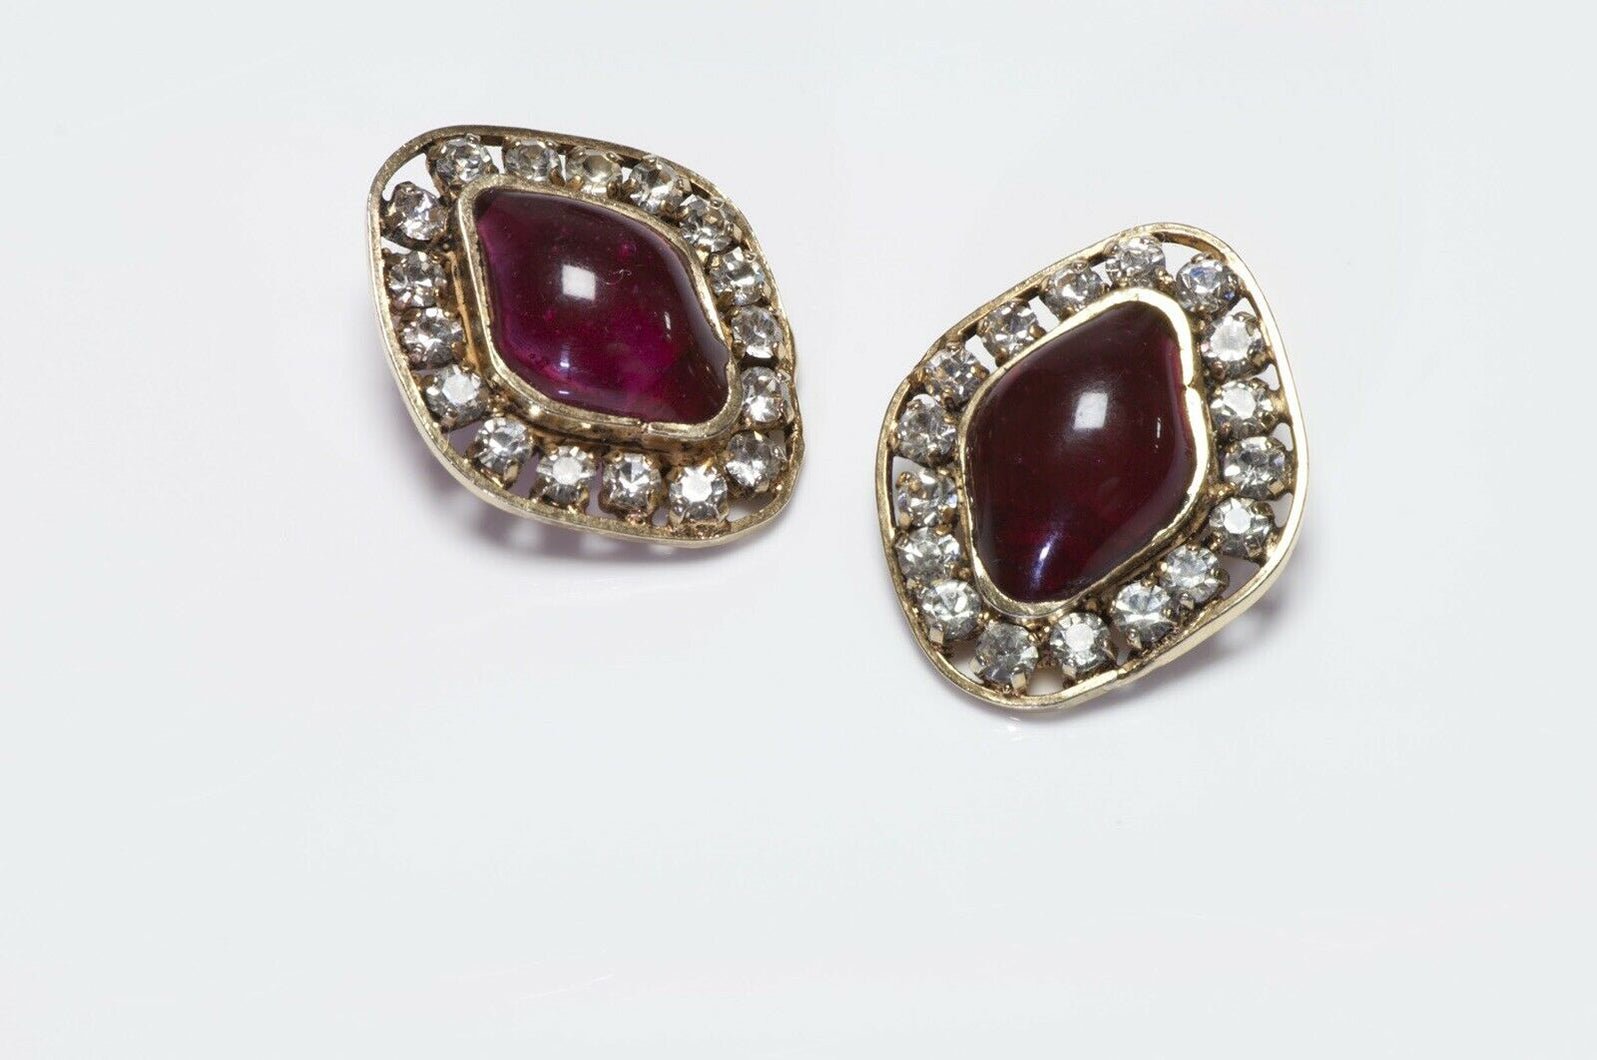 CHANEL 1970’s Gripoix Red Poured Glass Crystal Earrings